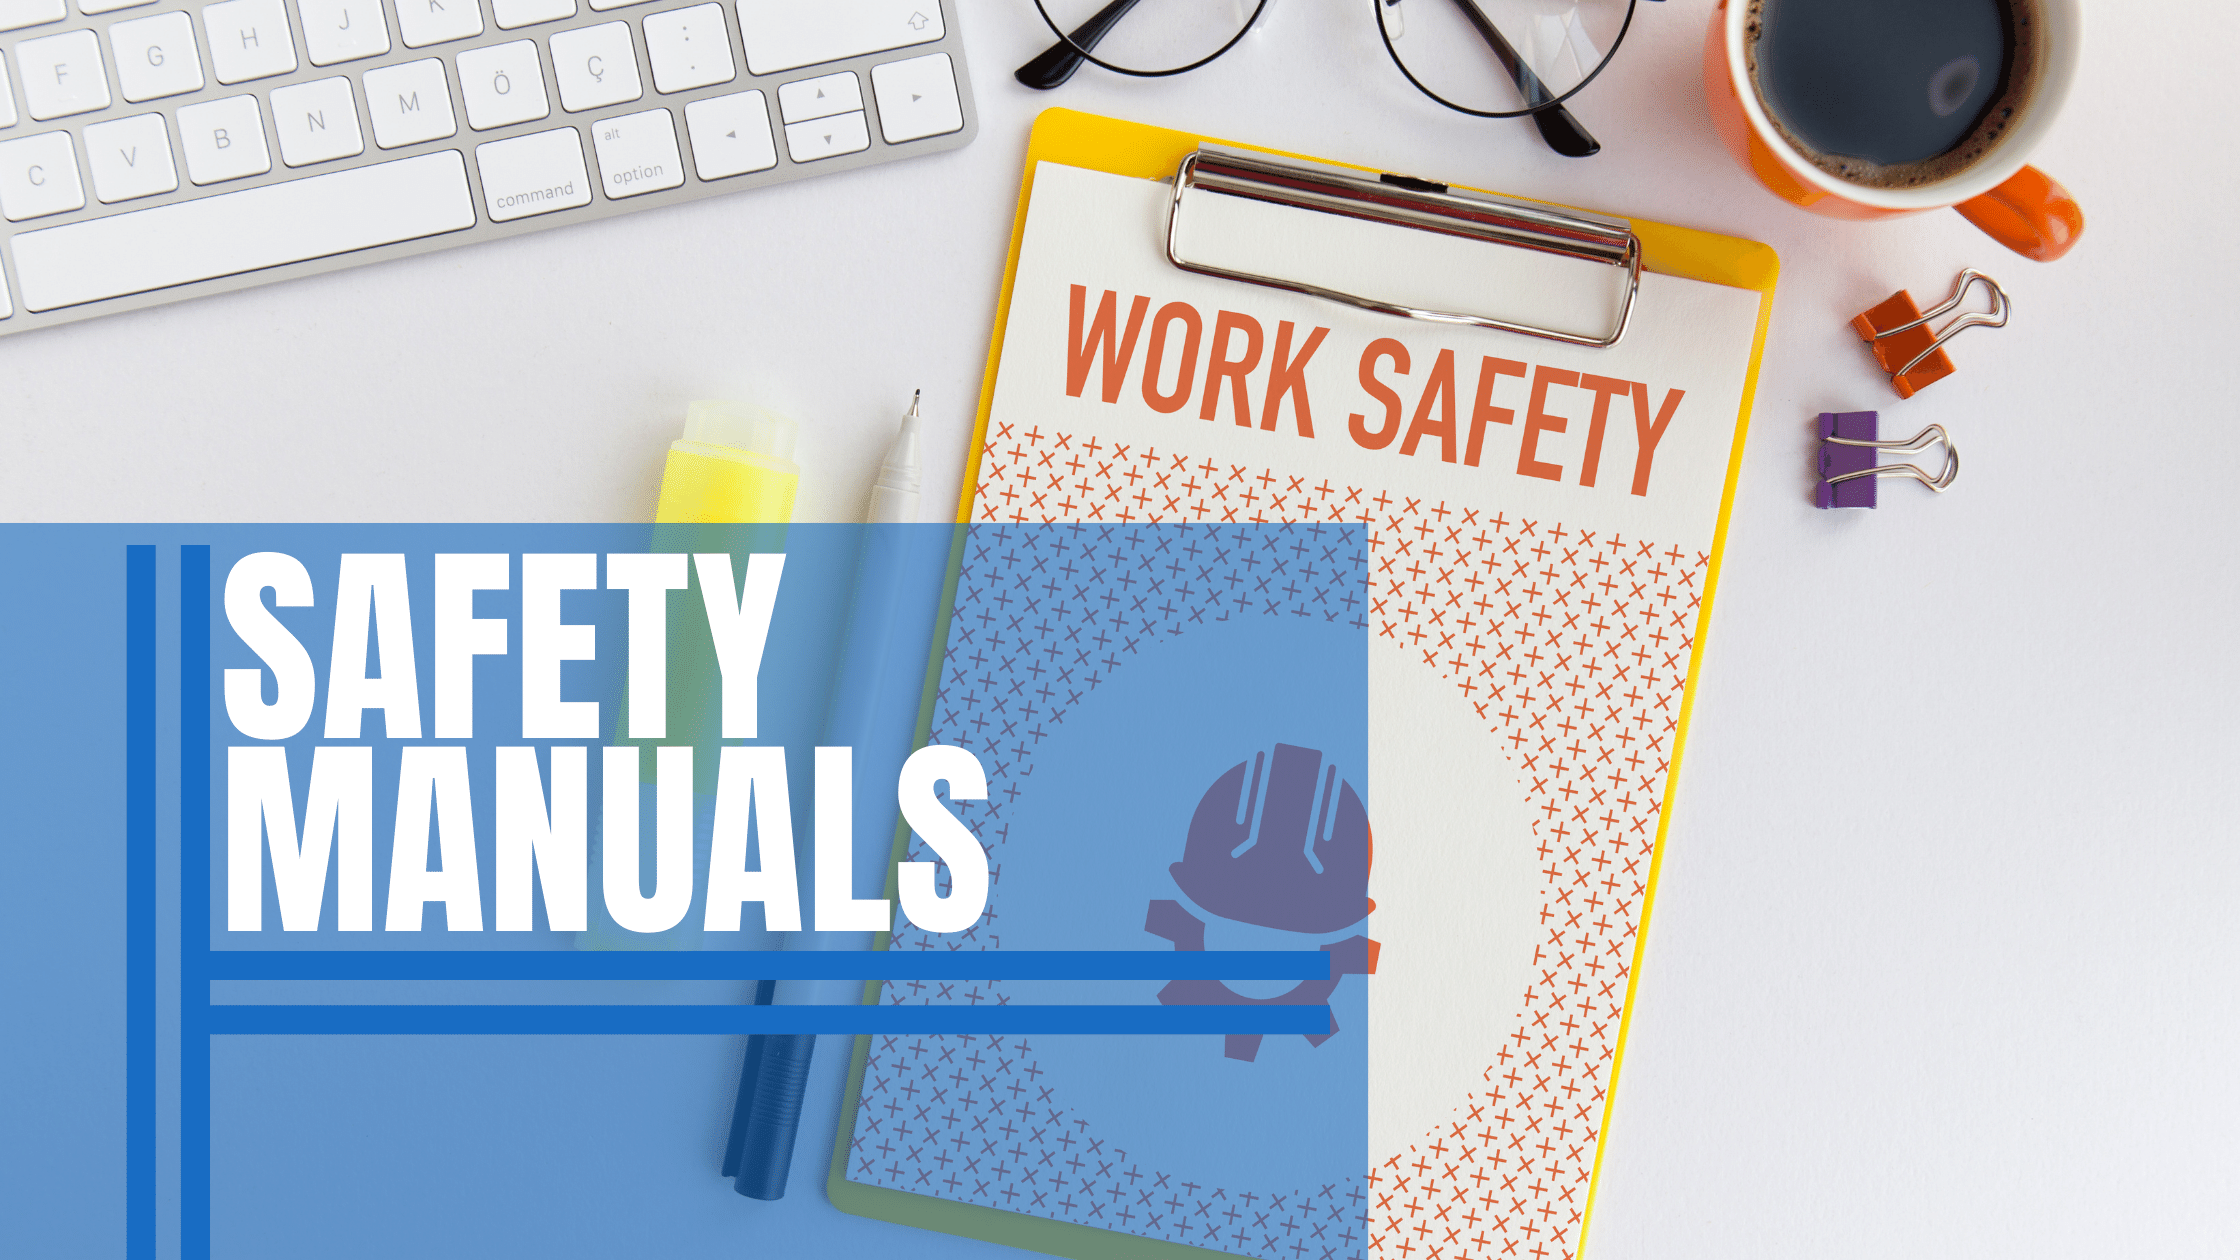 A safety manual is a critical document that outlines your company's safety policies, procedures, and practices.